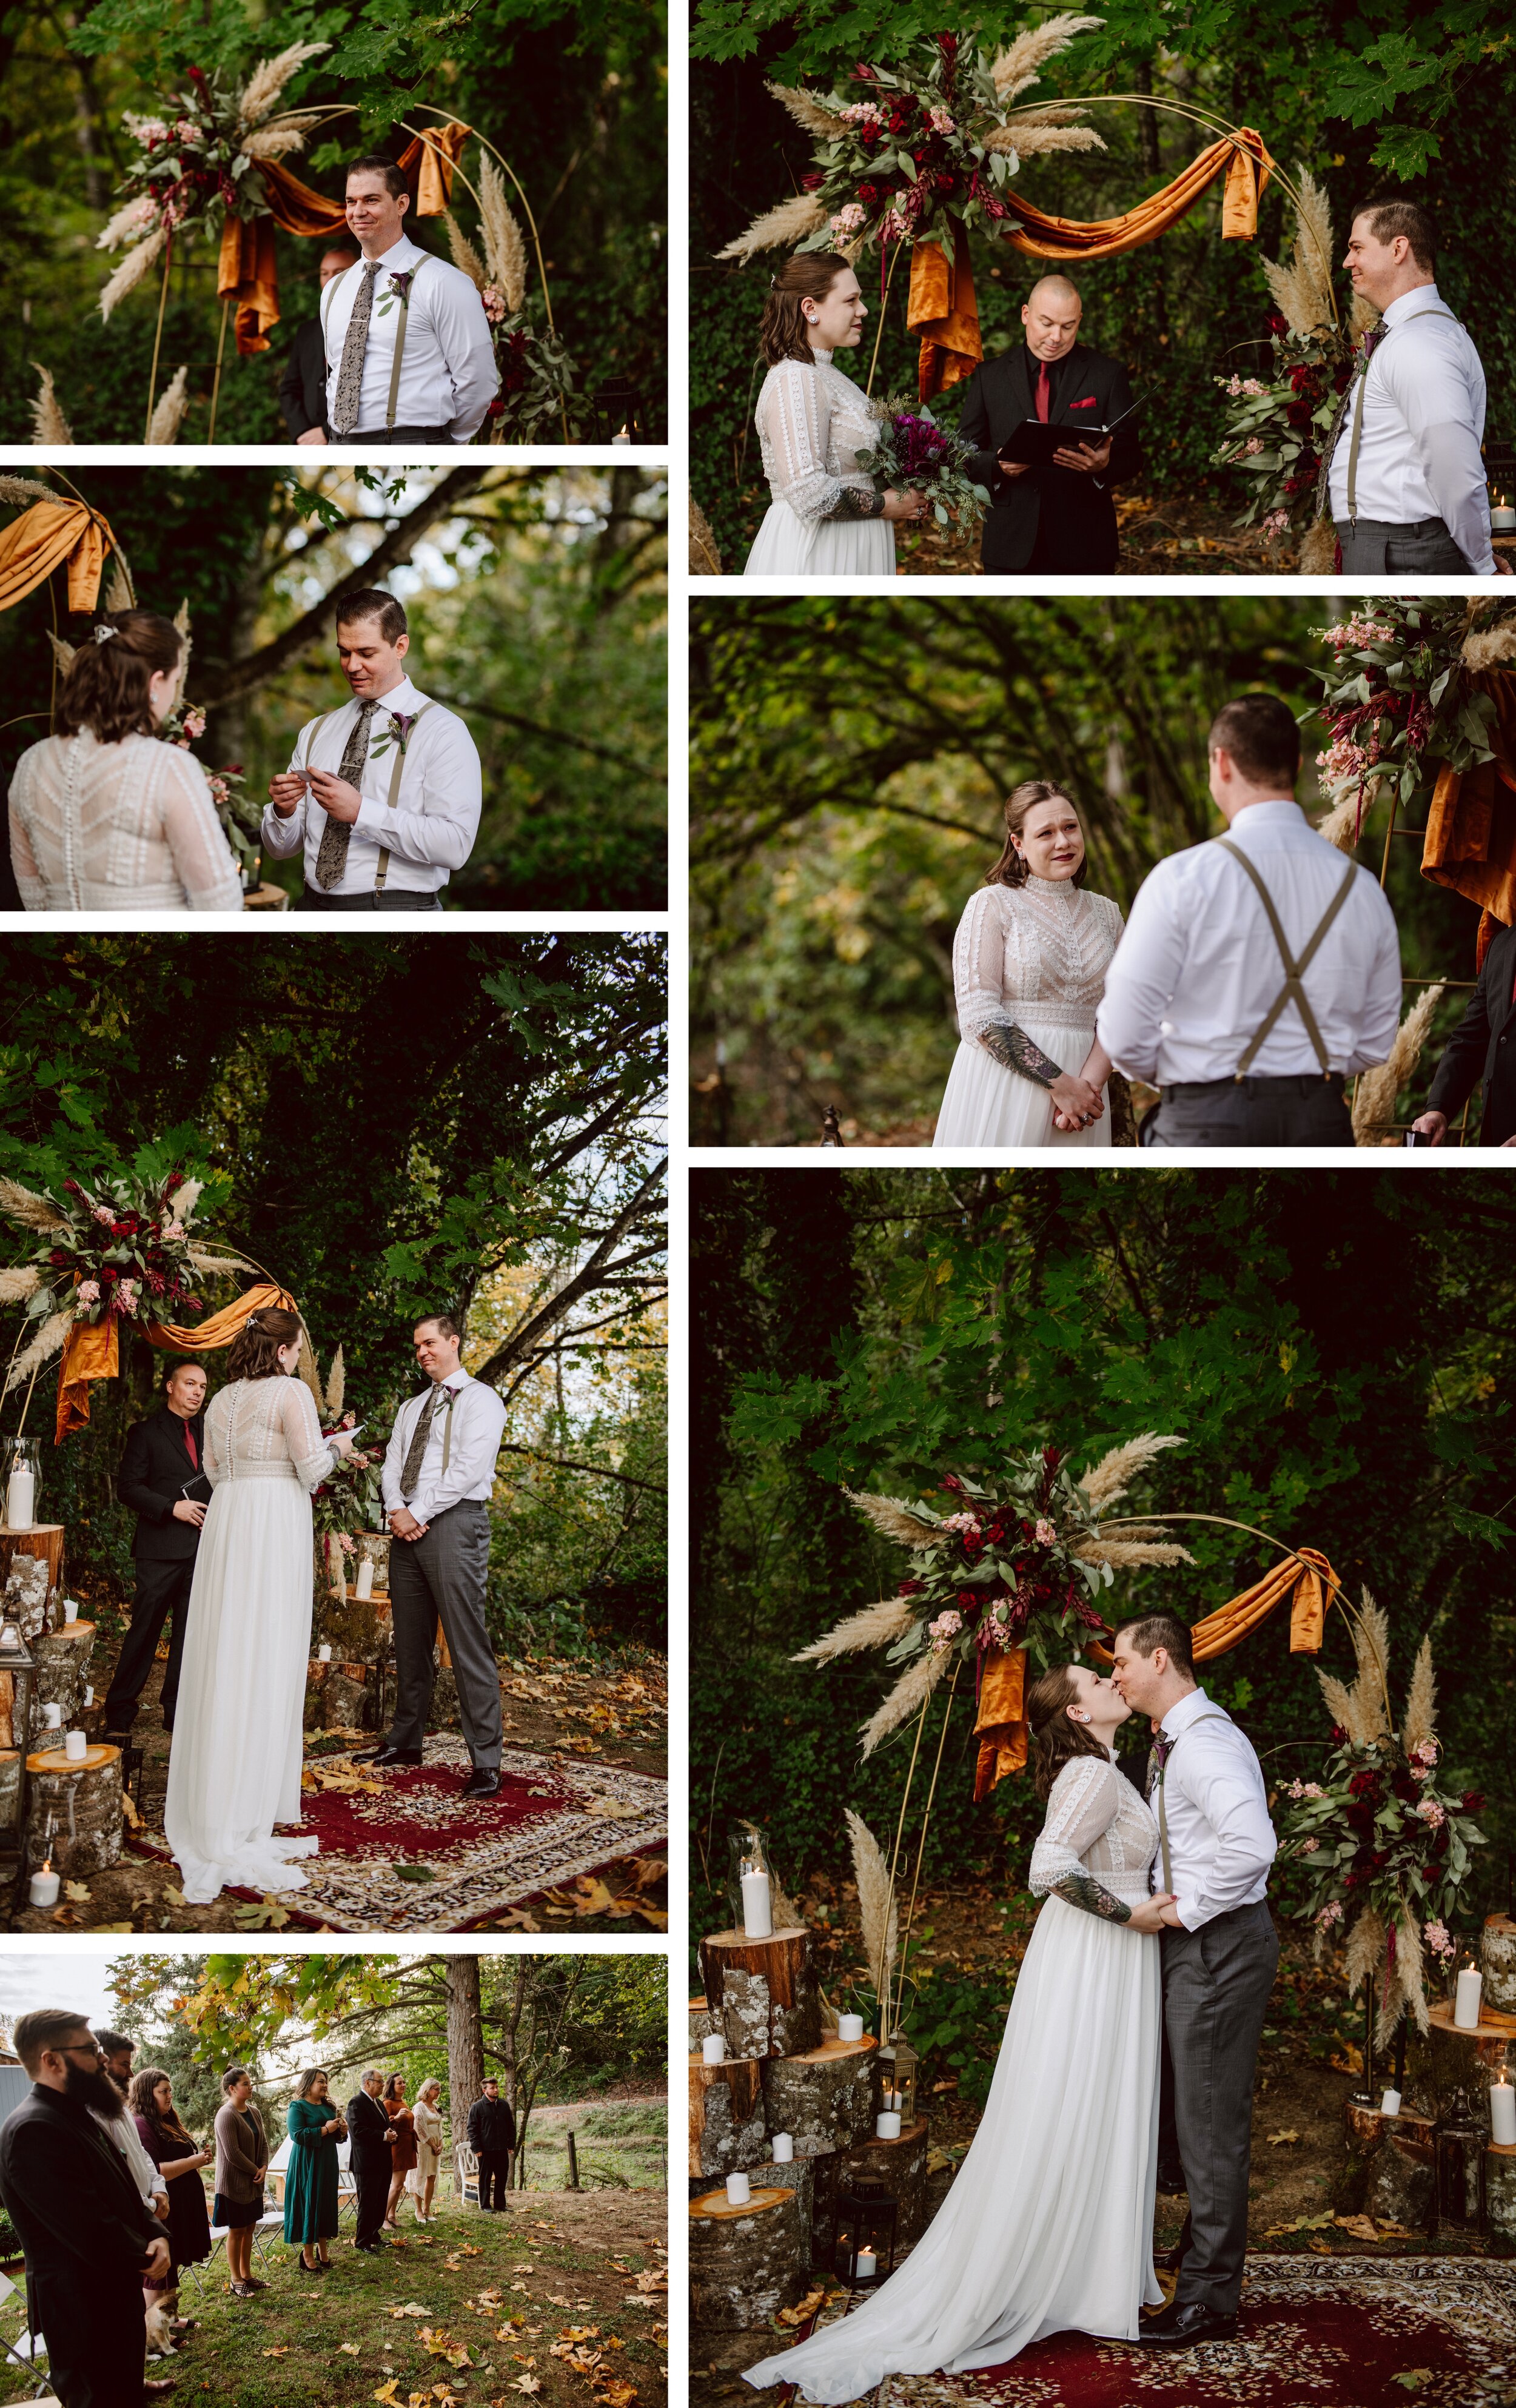 Fall backyard wedding ceremony with a homemade altar made up of red, green, and orange florals and drapes, lit by candlelight